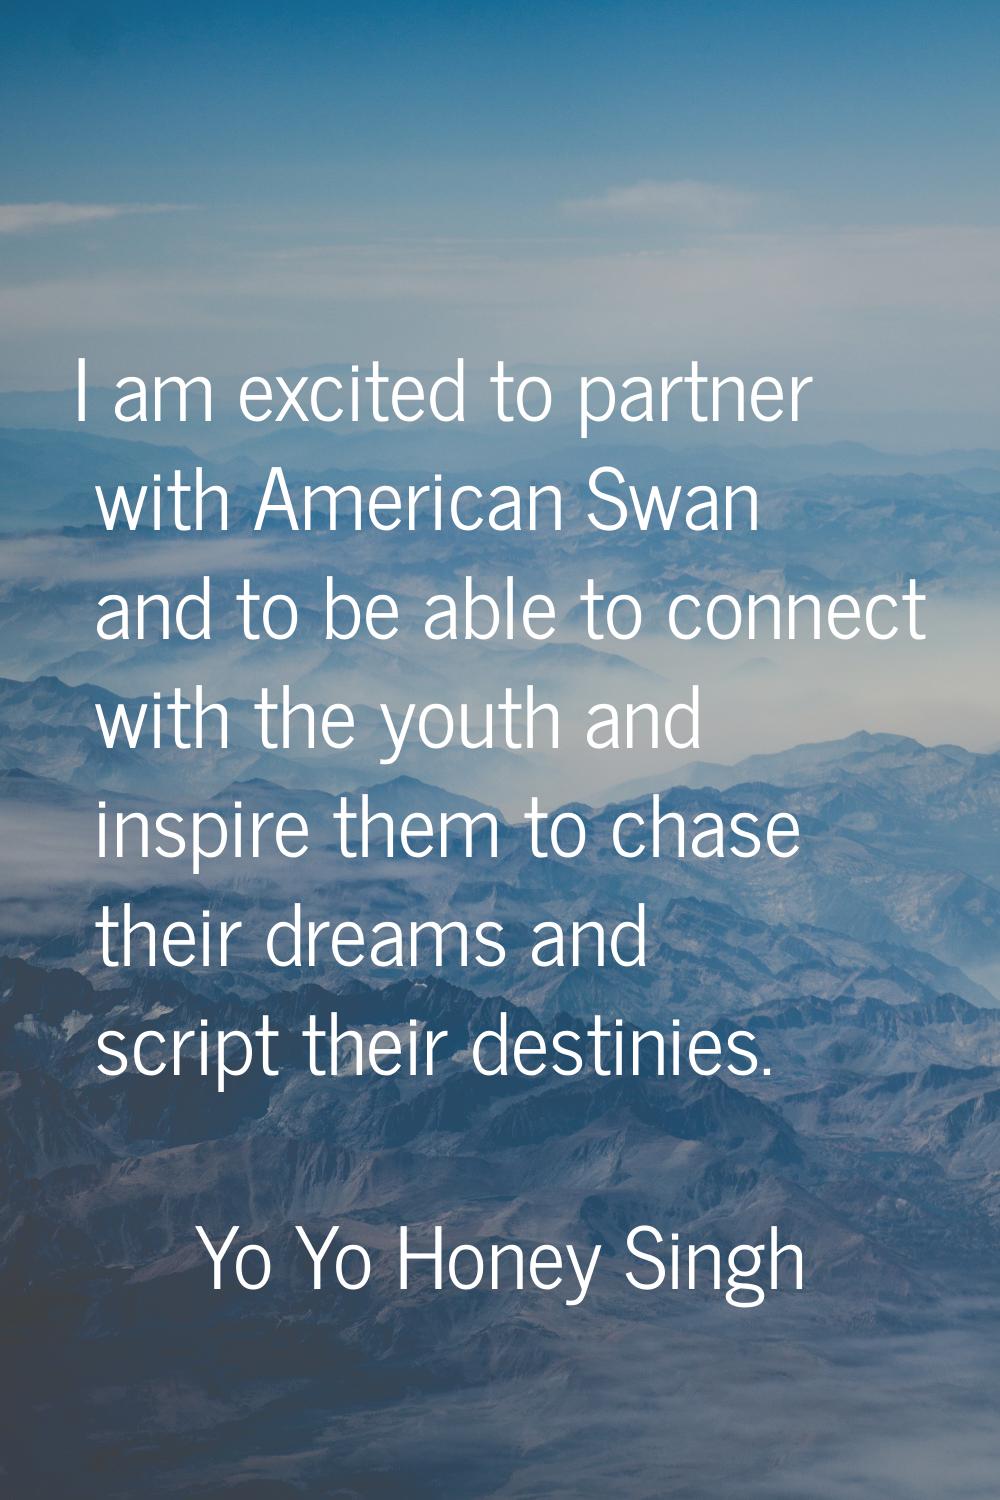 I am excited to partner with American Swan and to be able to connect with the youth and inspire the